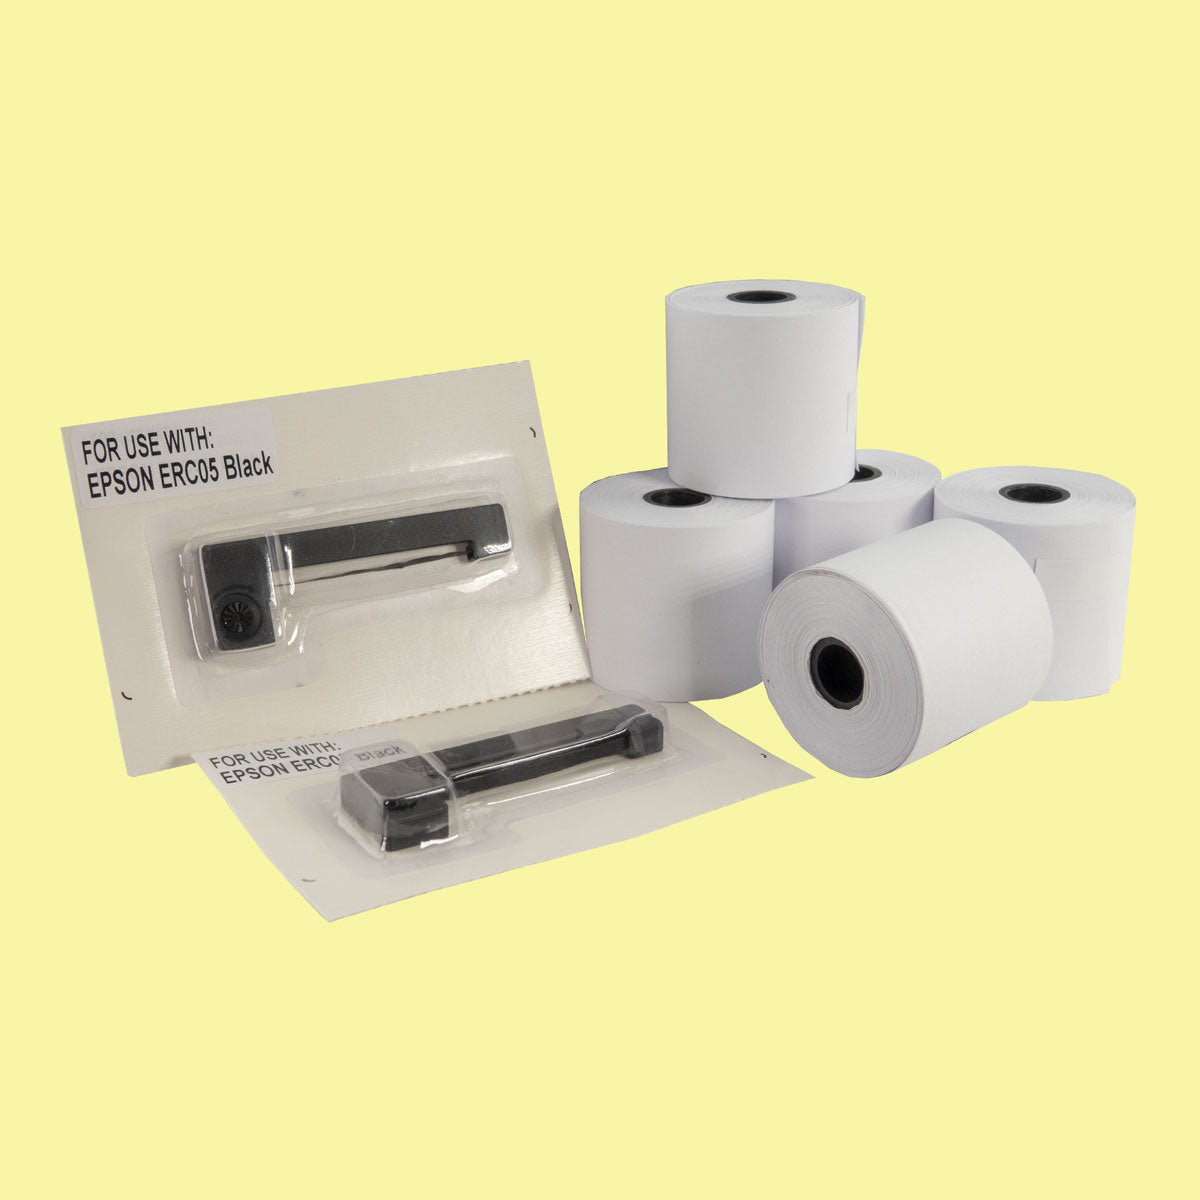 Blumax Auto Tester Ribbon and Paper Roll Packages